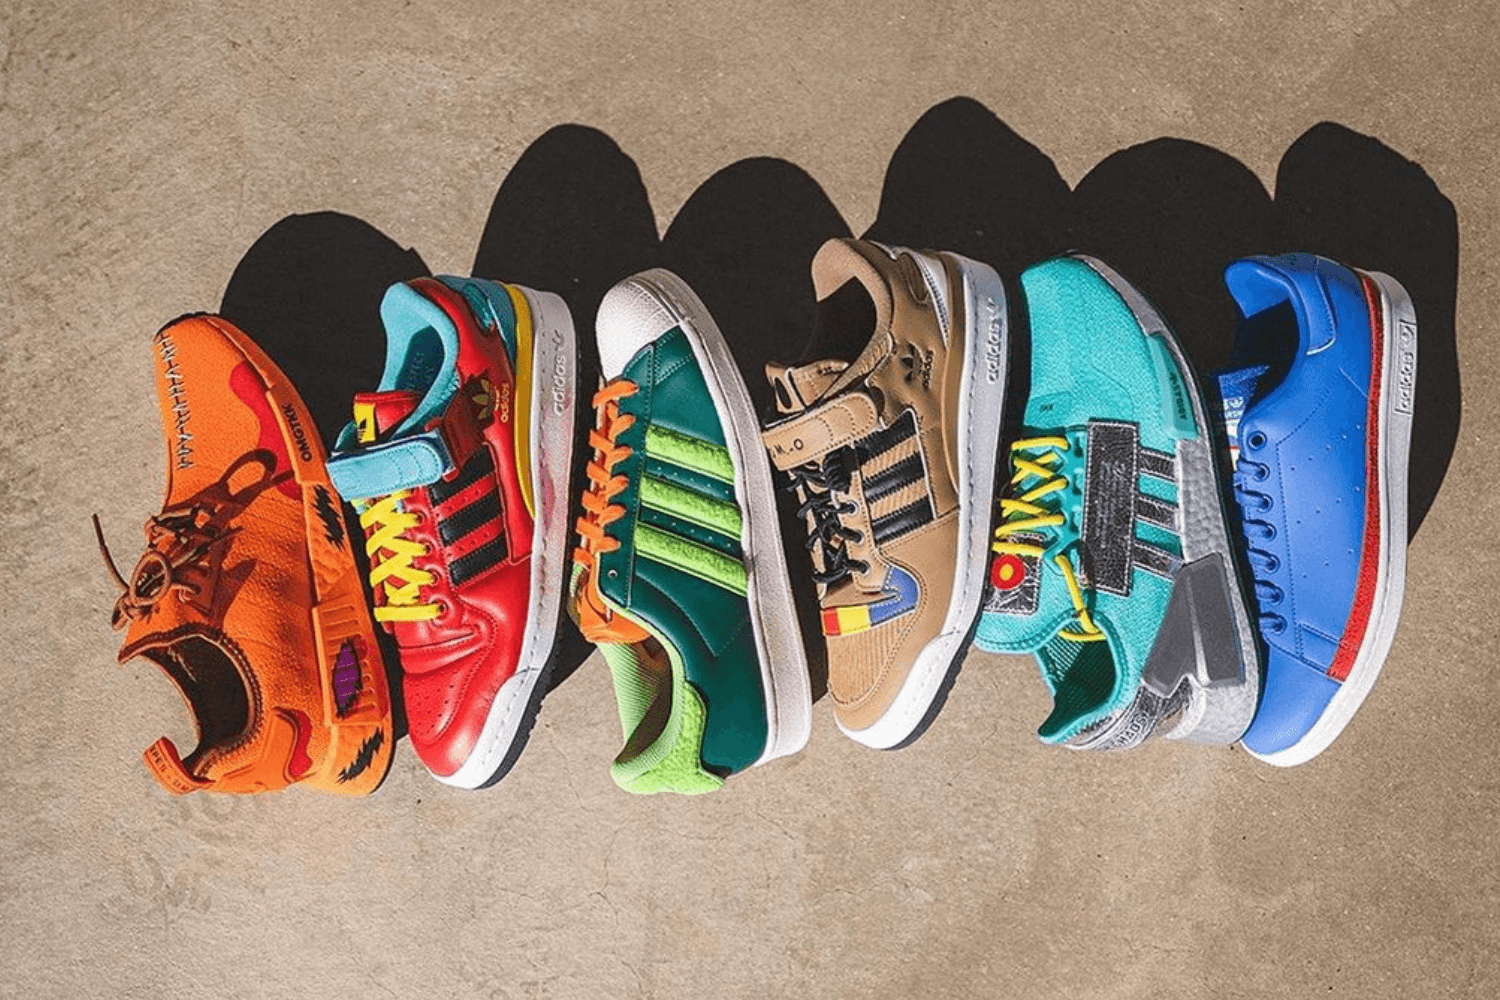 The adidas x South Park collection is now available at Foot Locker